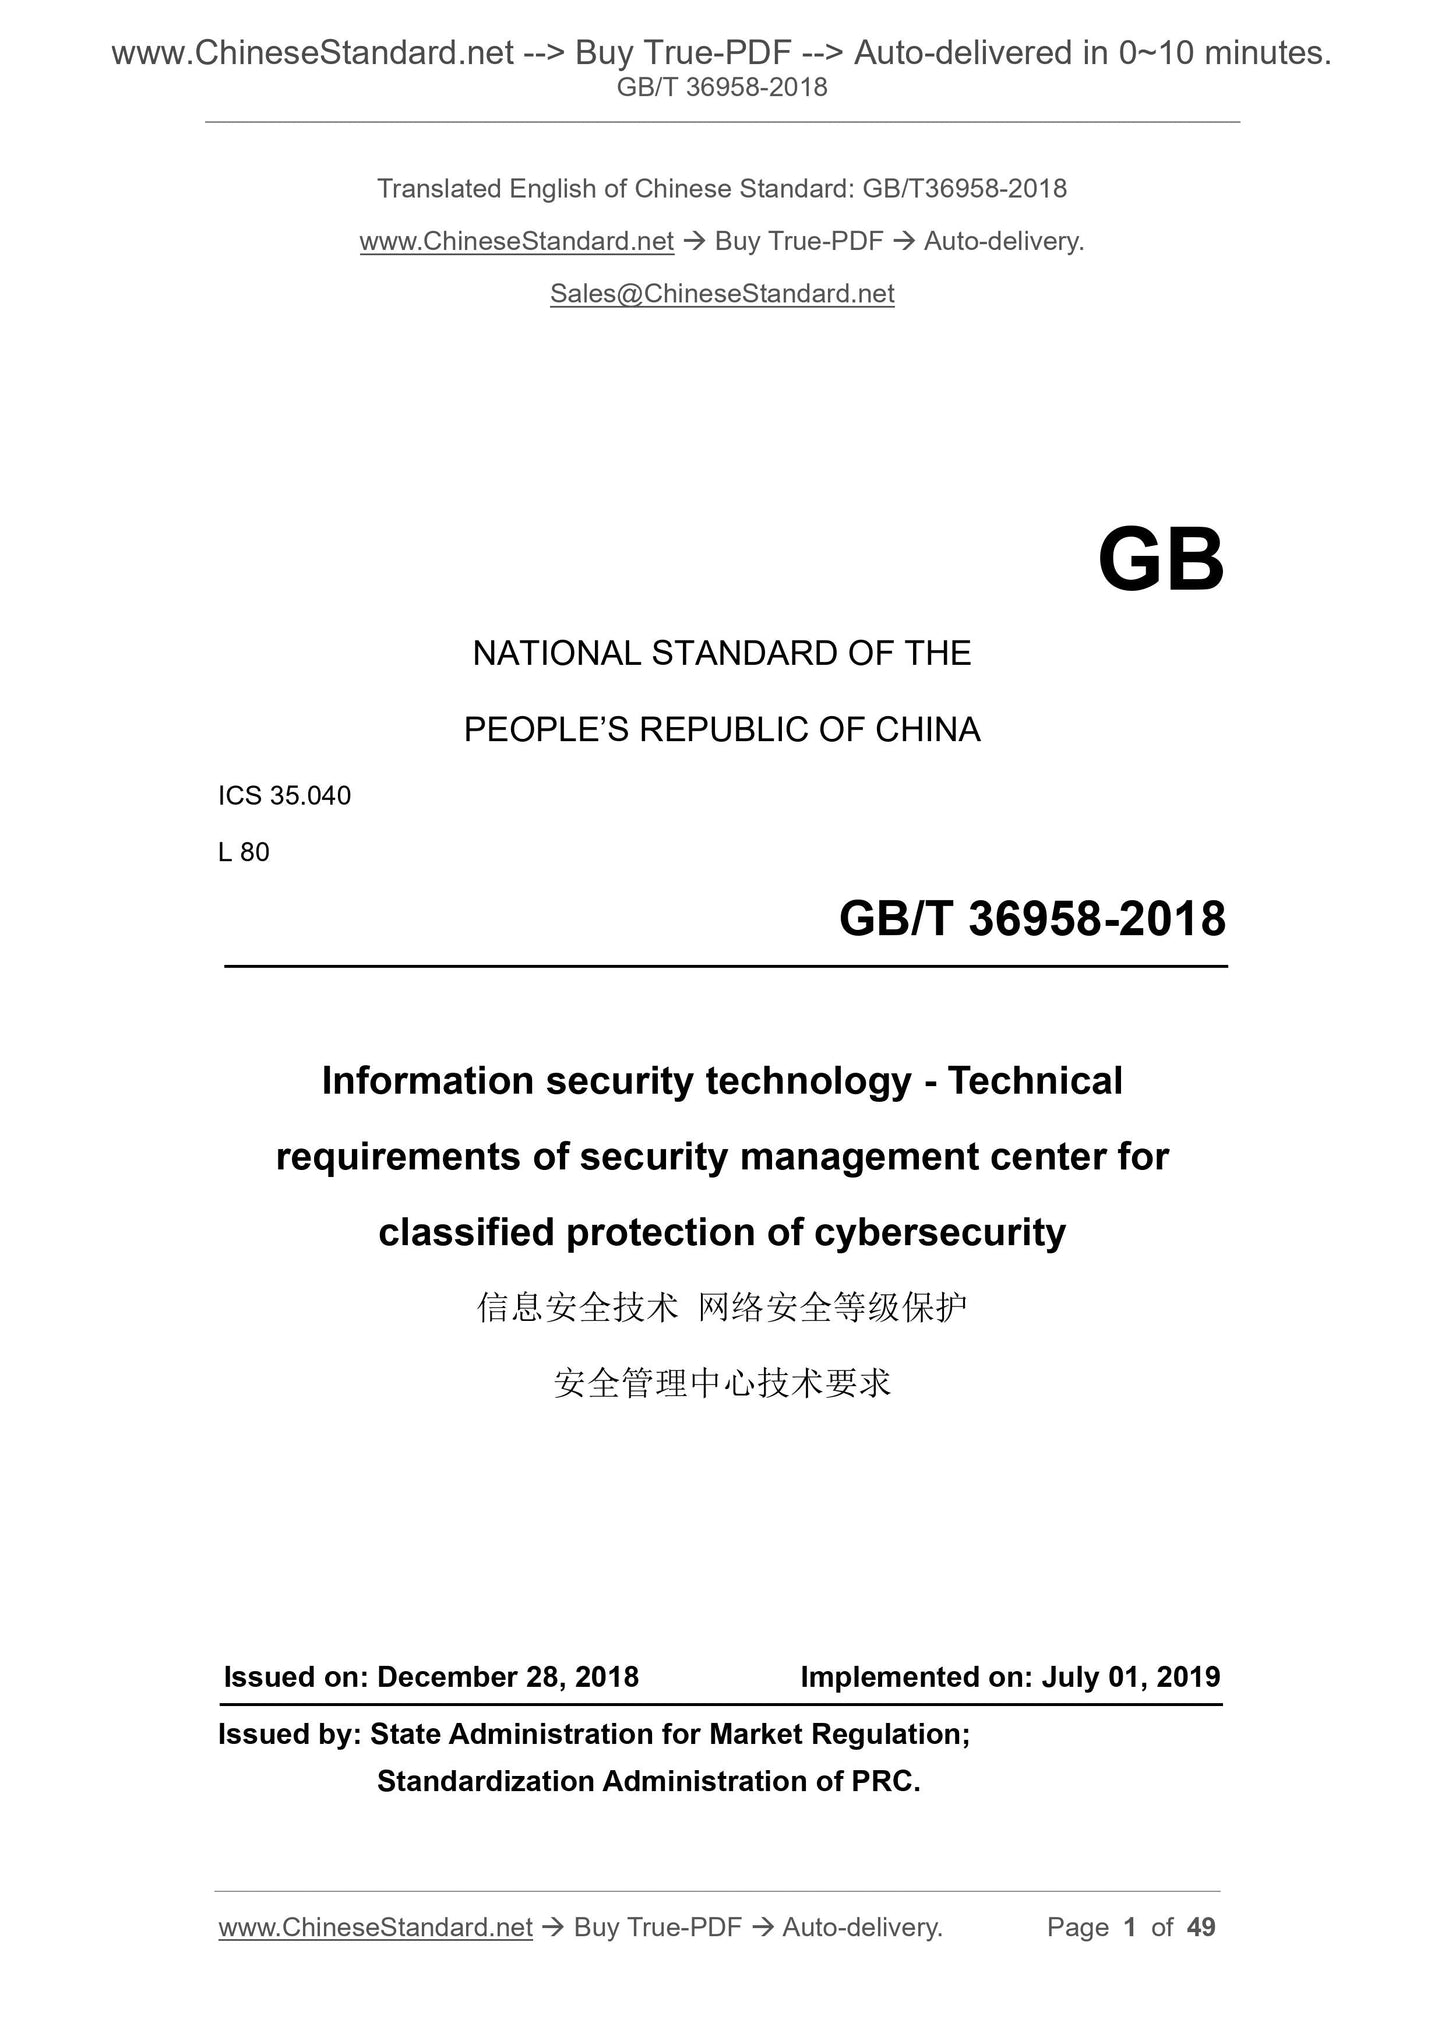 GB/T 36958-2018 Page 1